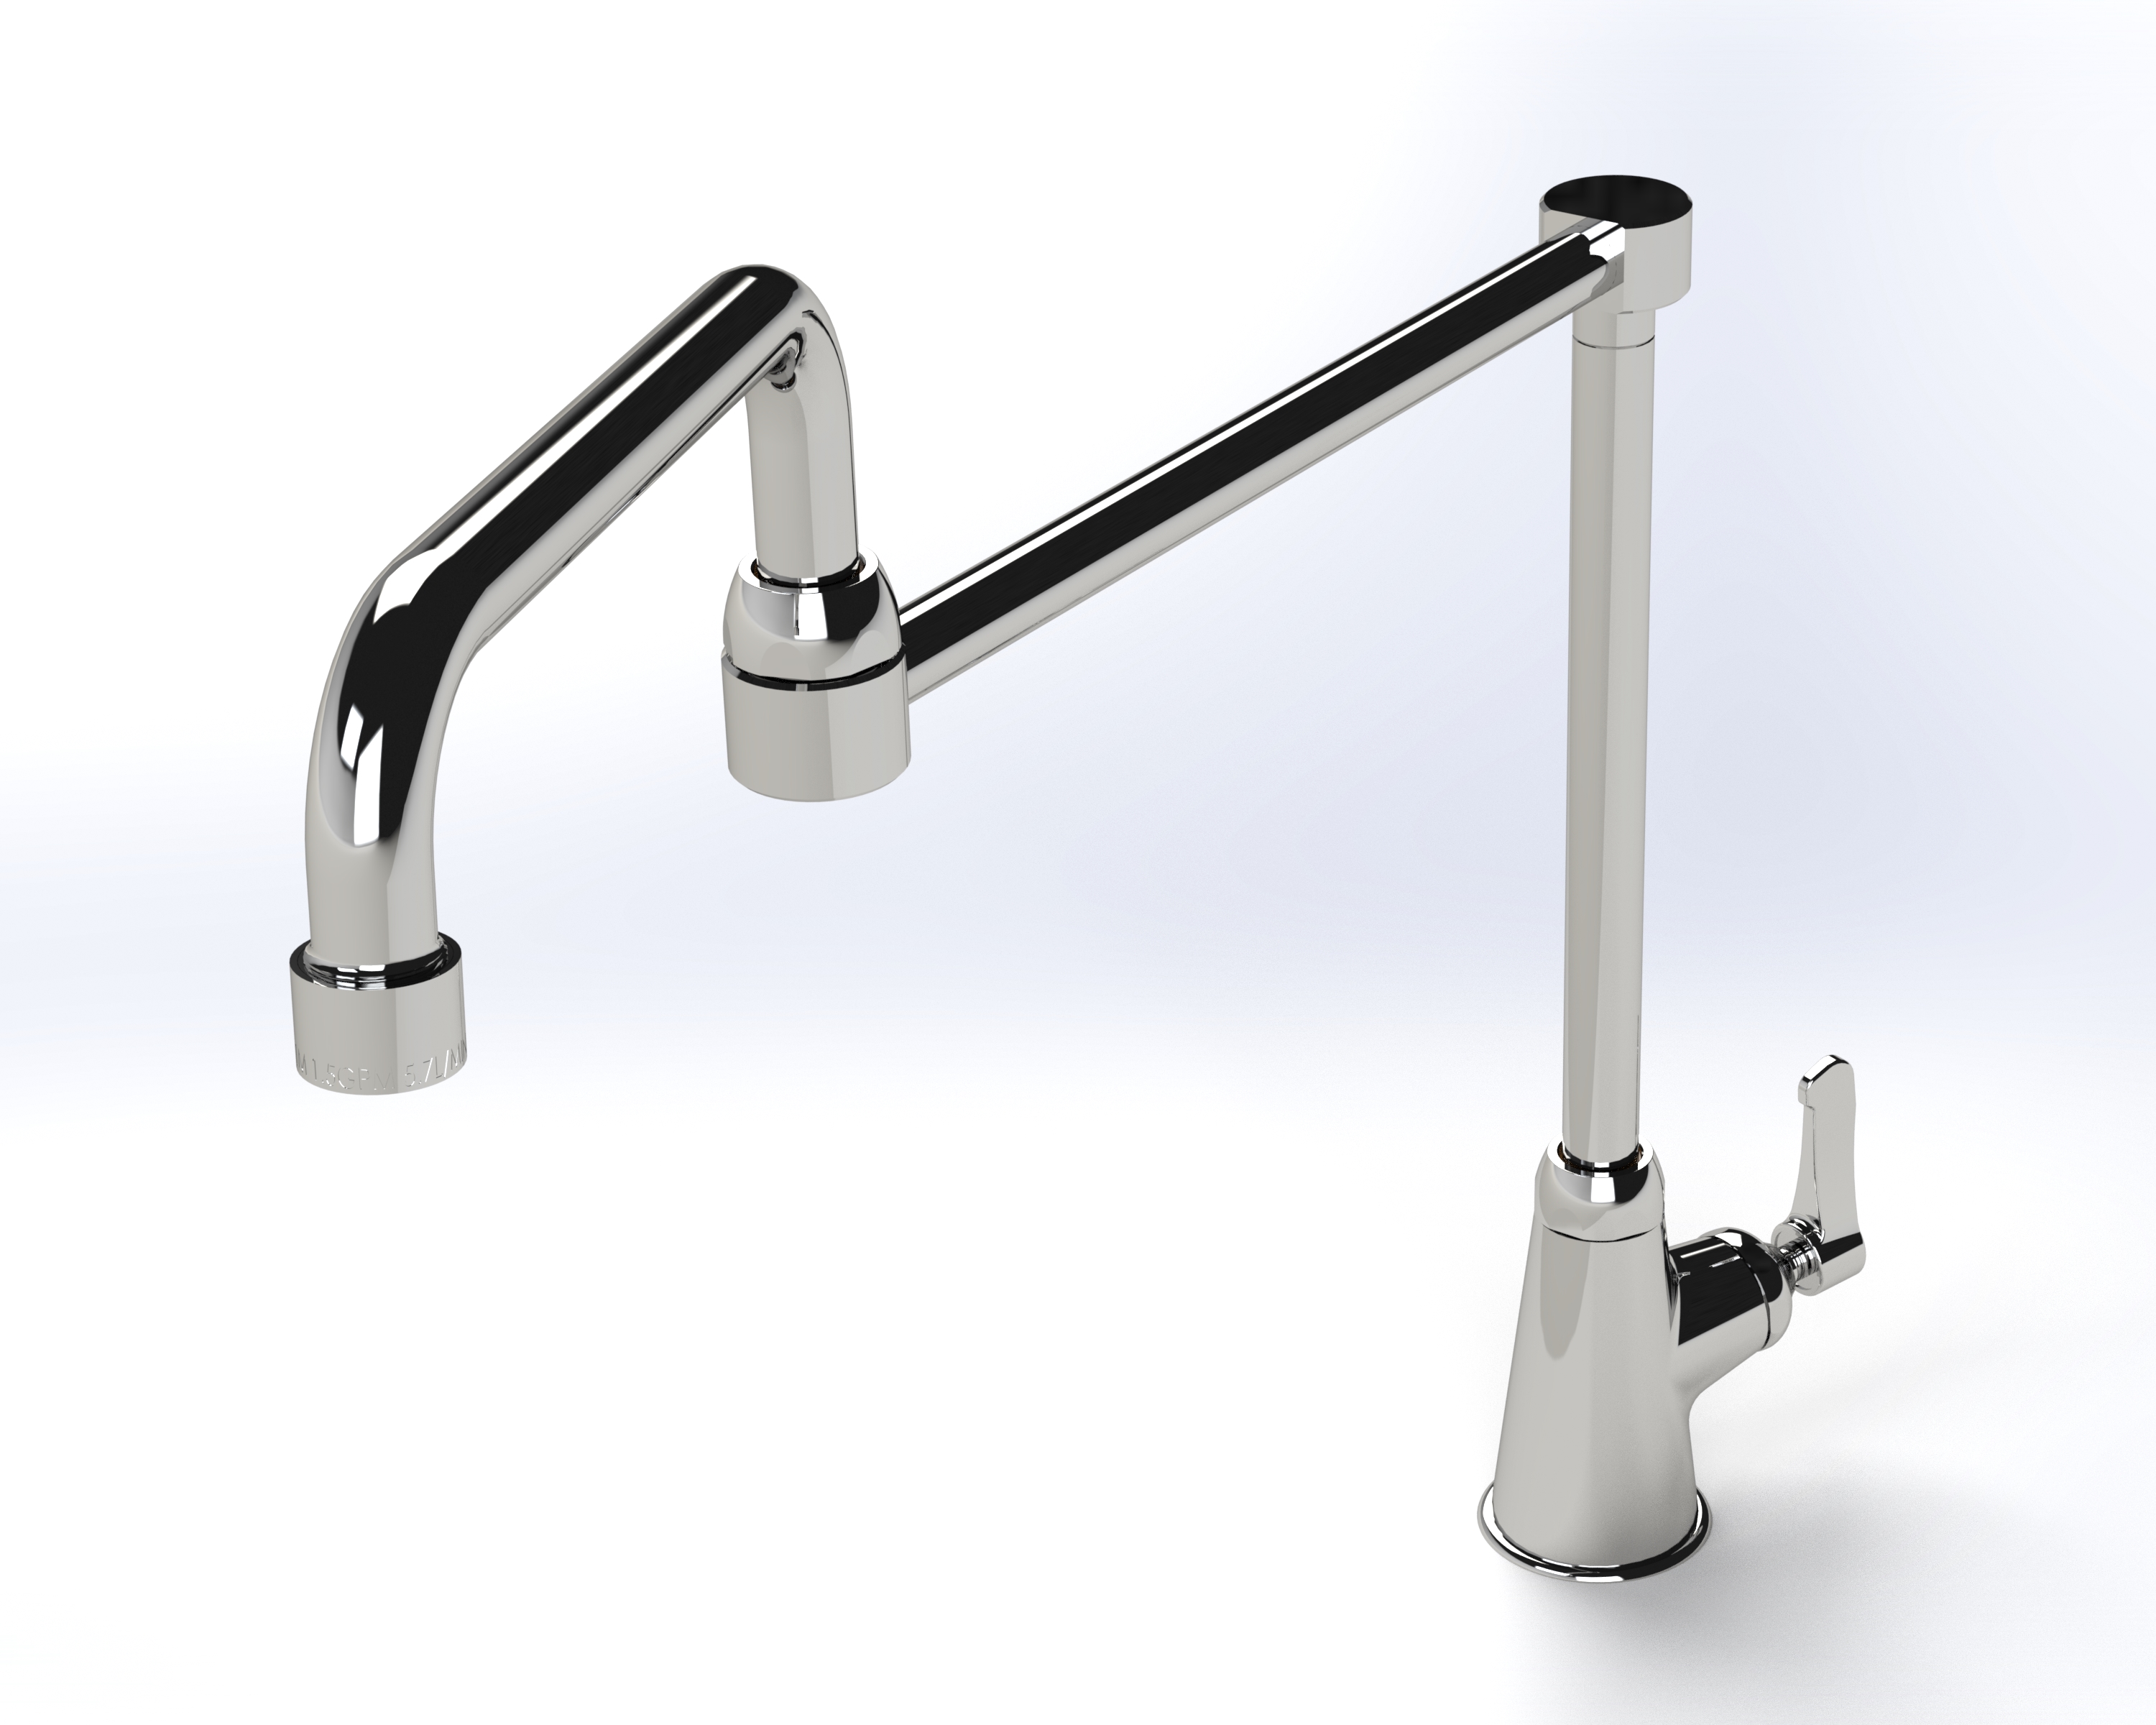 Pot Filler Faucet With a Single Hole Deck Mounted Control Valve